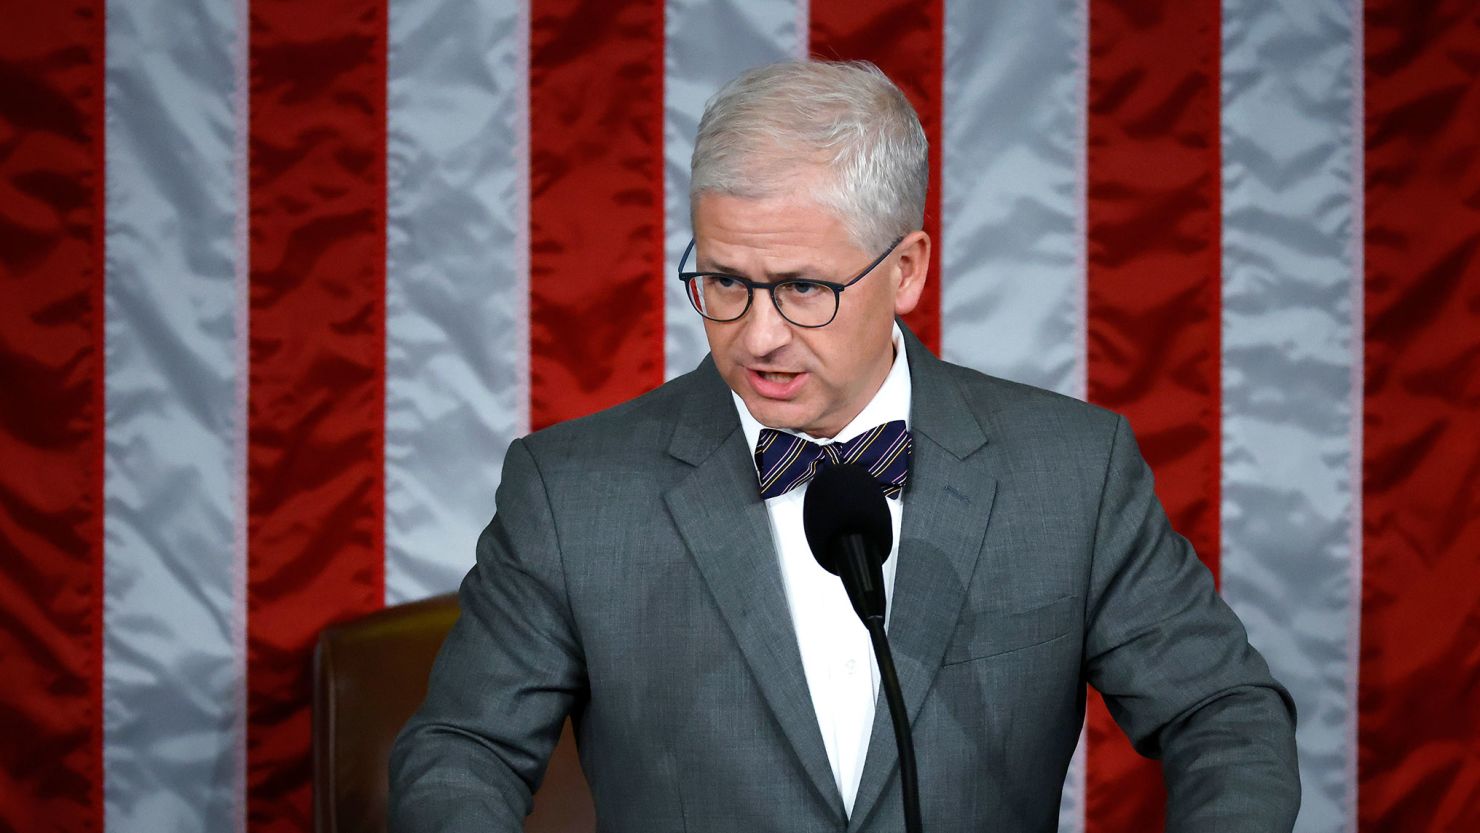 In this October 17 photo, Speaker Pro Tempore Rep. Patrick McHenry presides over the vote for House Speaker at the US Capitol Building in Washington, DC.